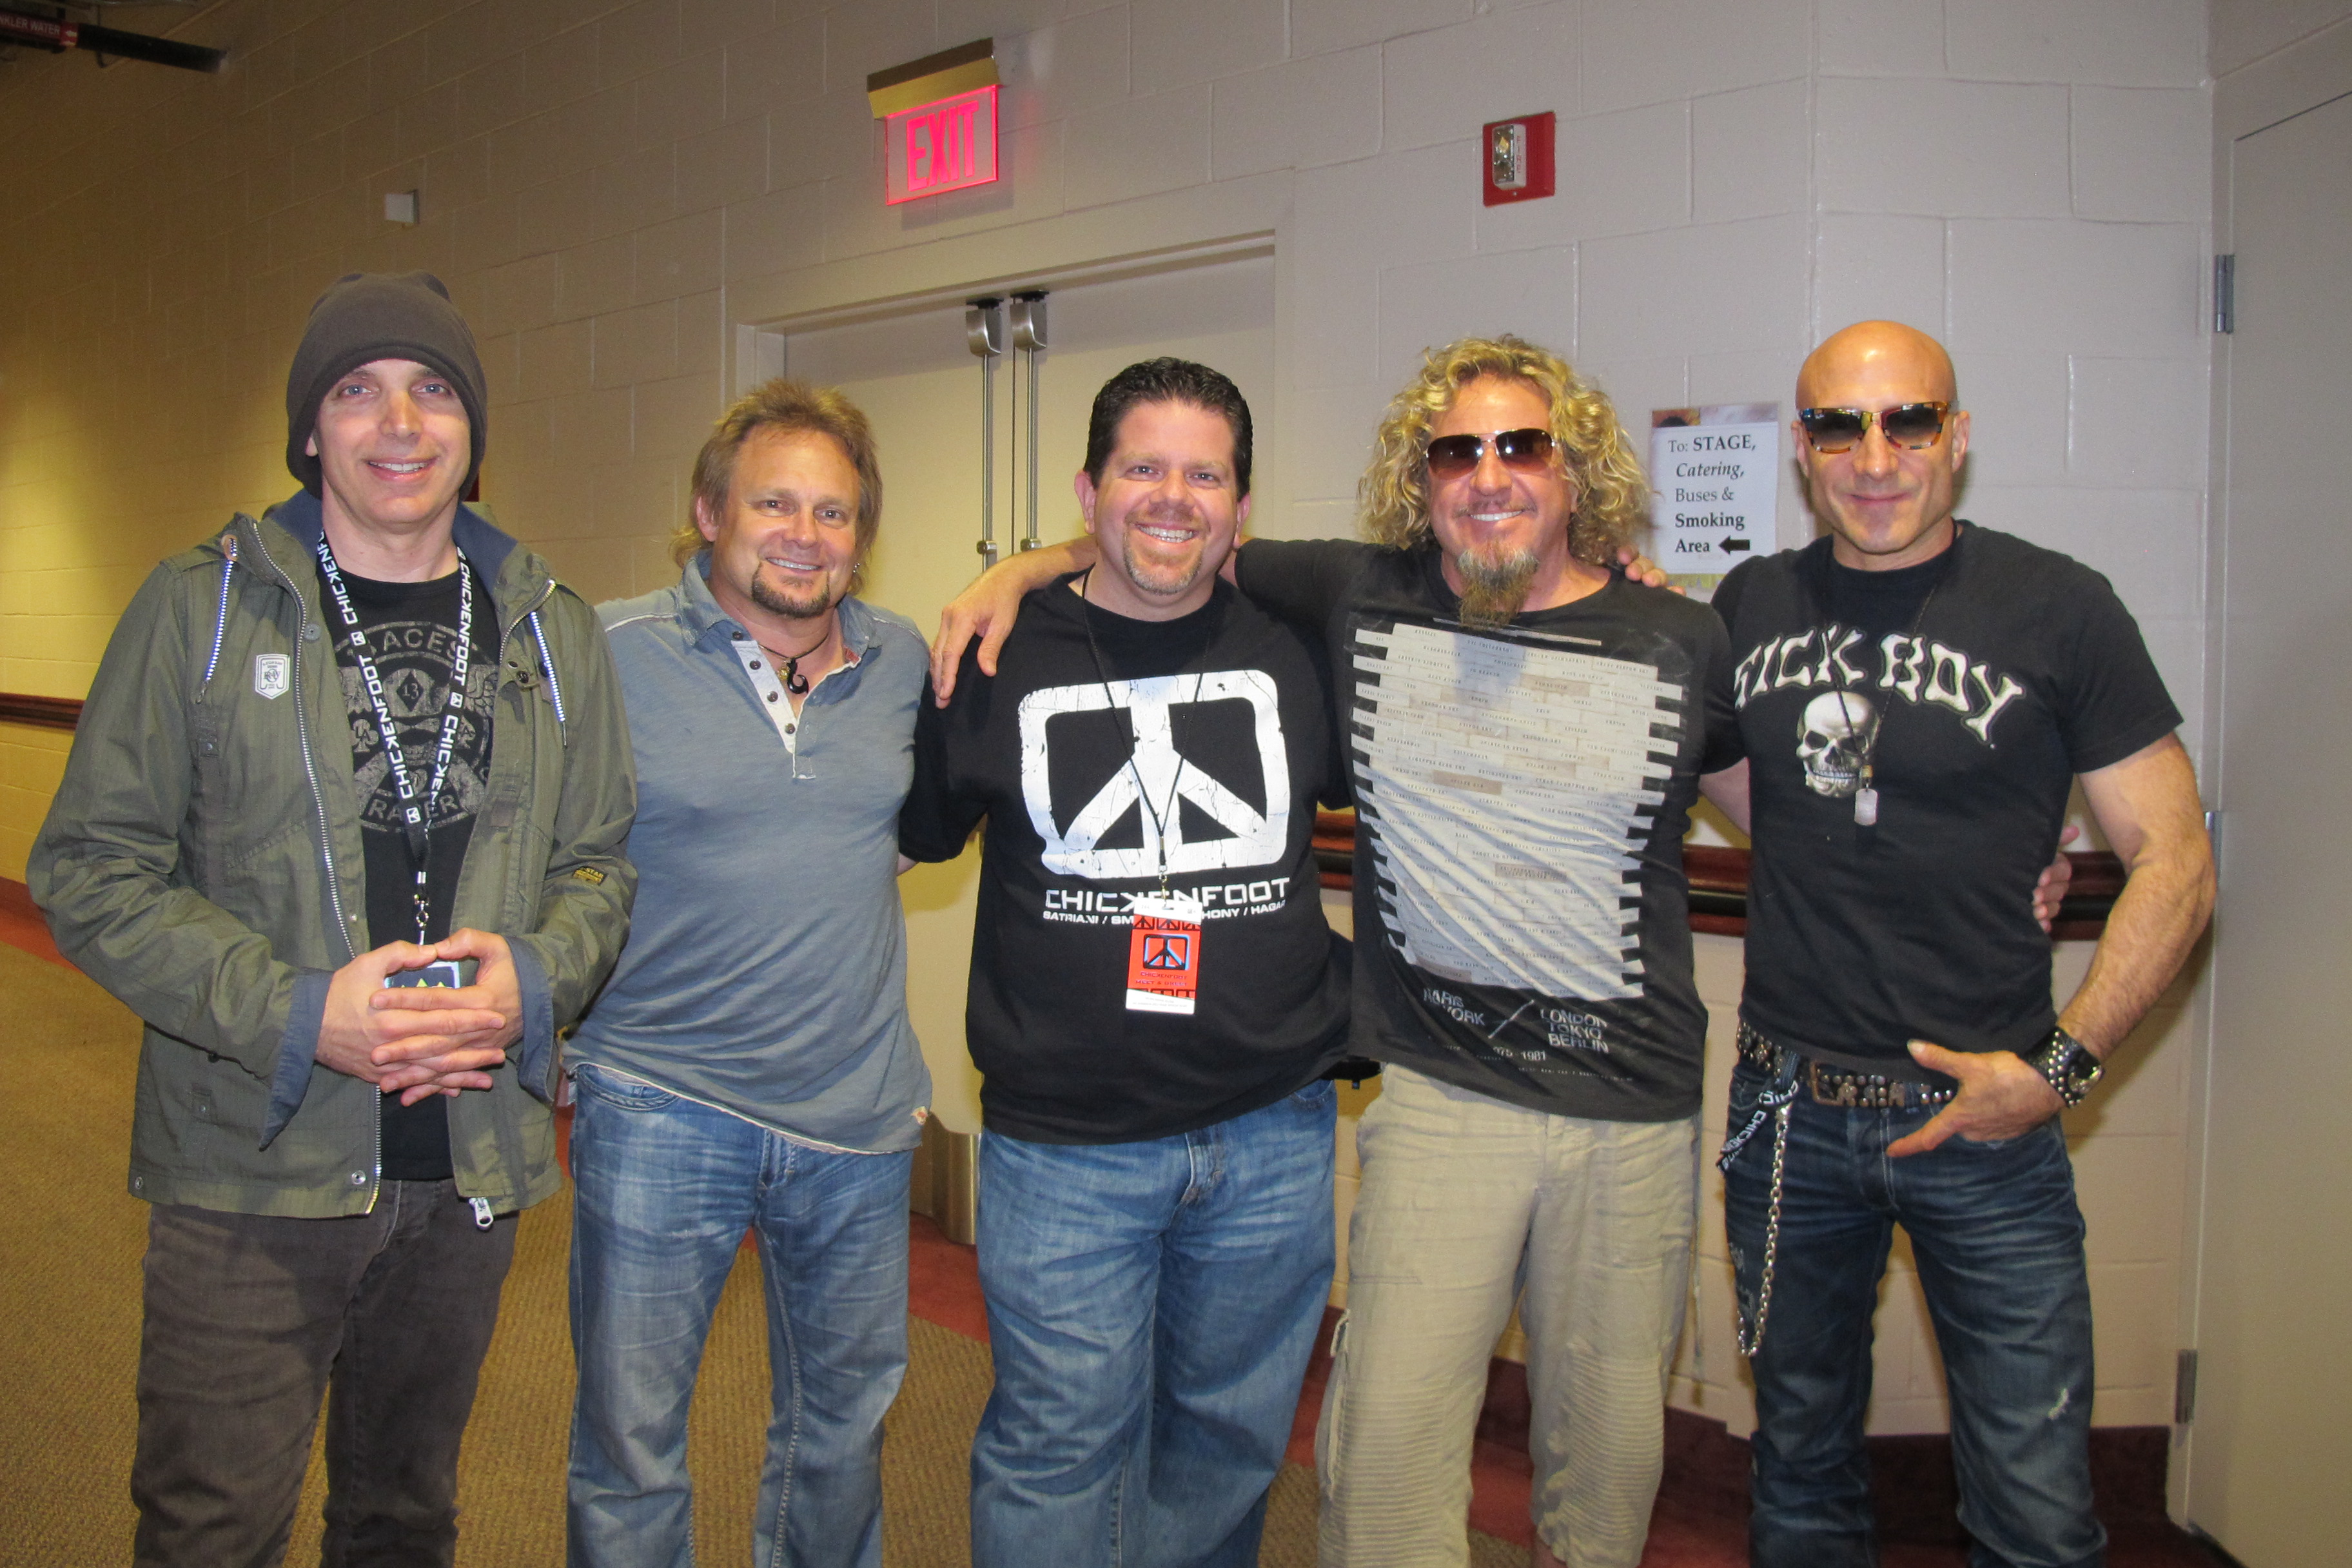 With the awesome rock band Chickenfoot at Mohegan Sun, CT